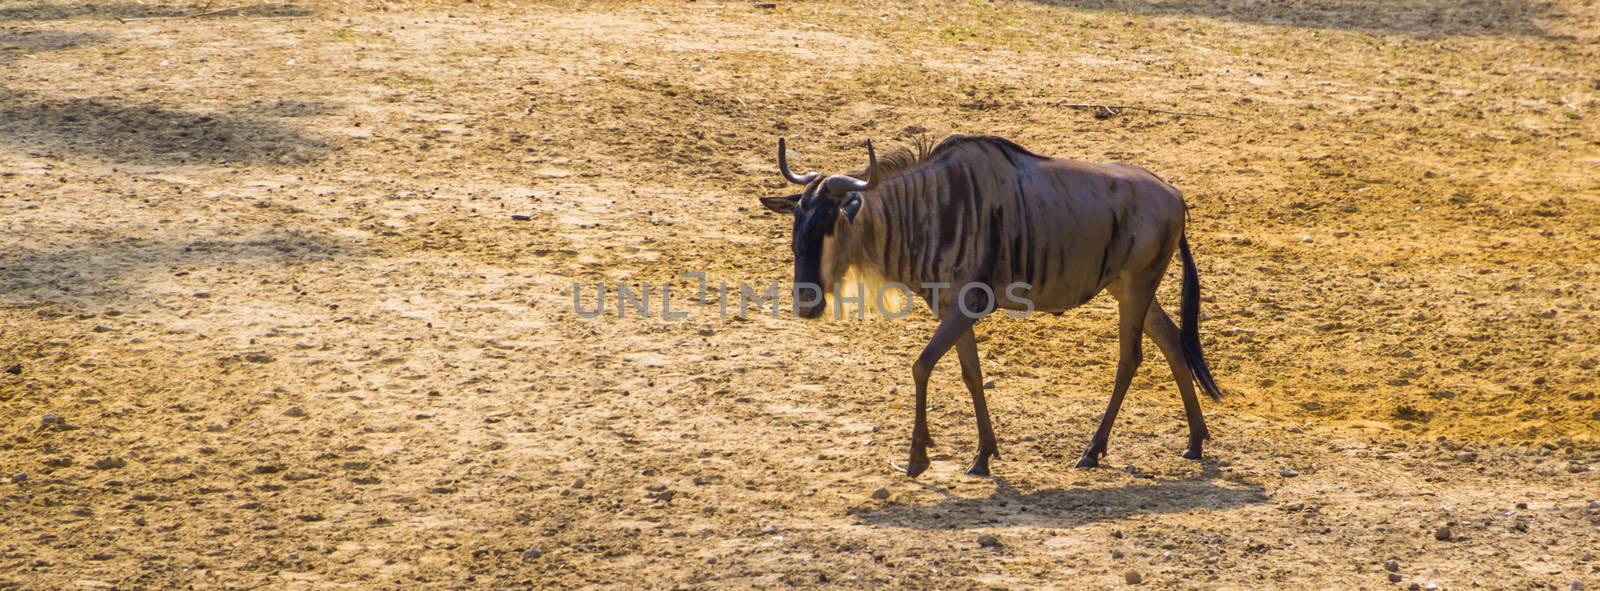 single eastern white bearded wildebeest walking through the sand, tropical antelope specie from Africa